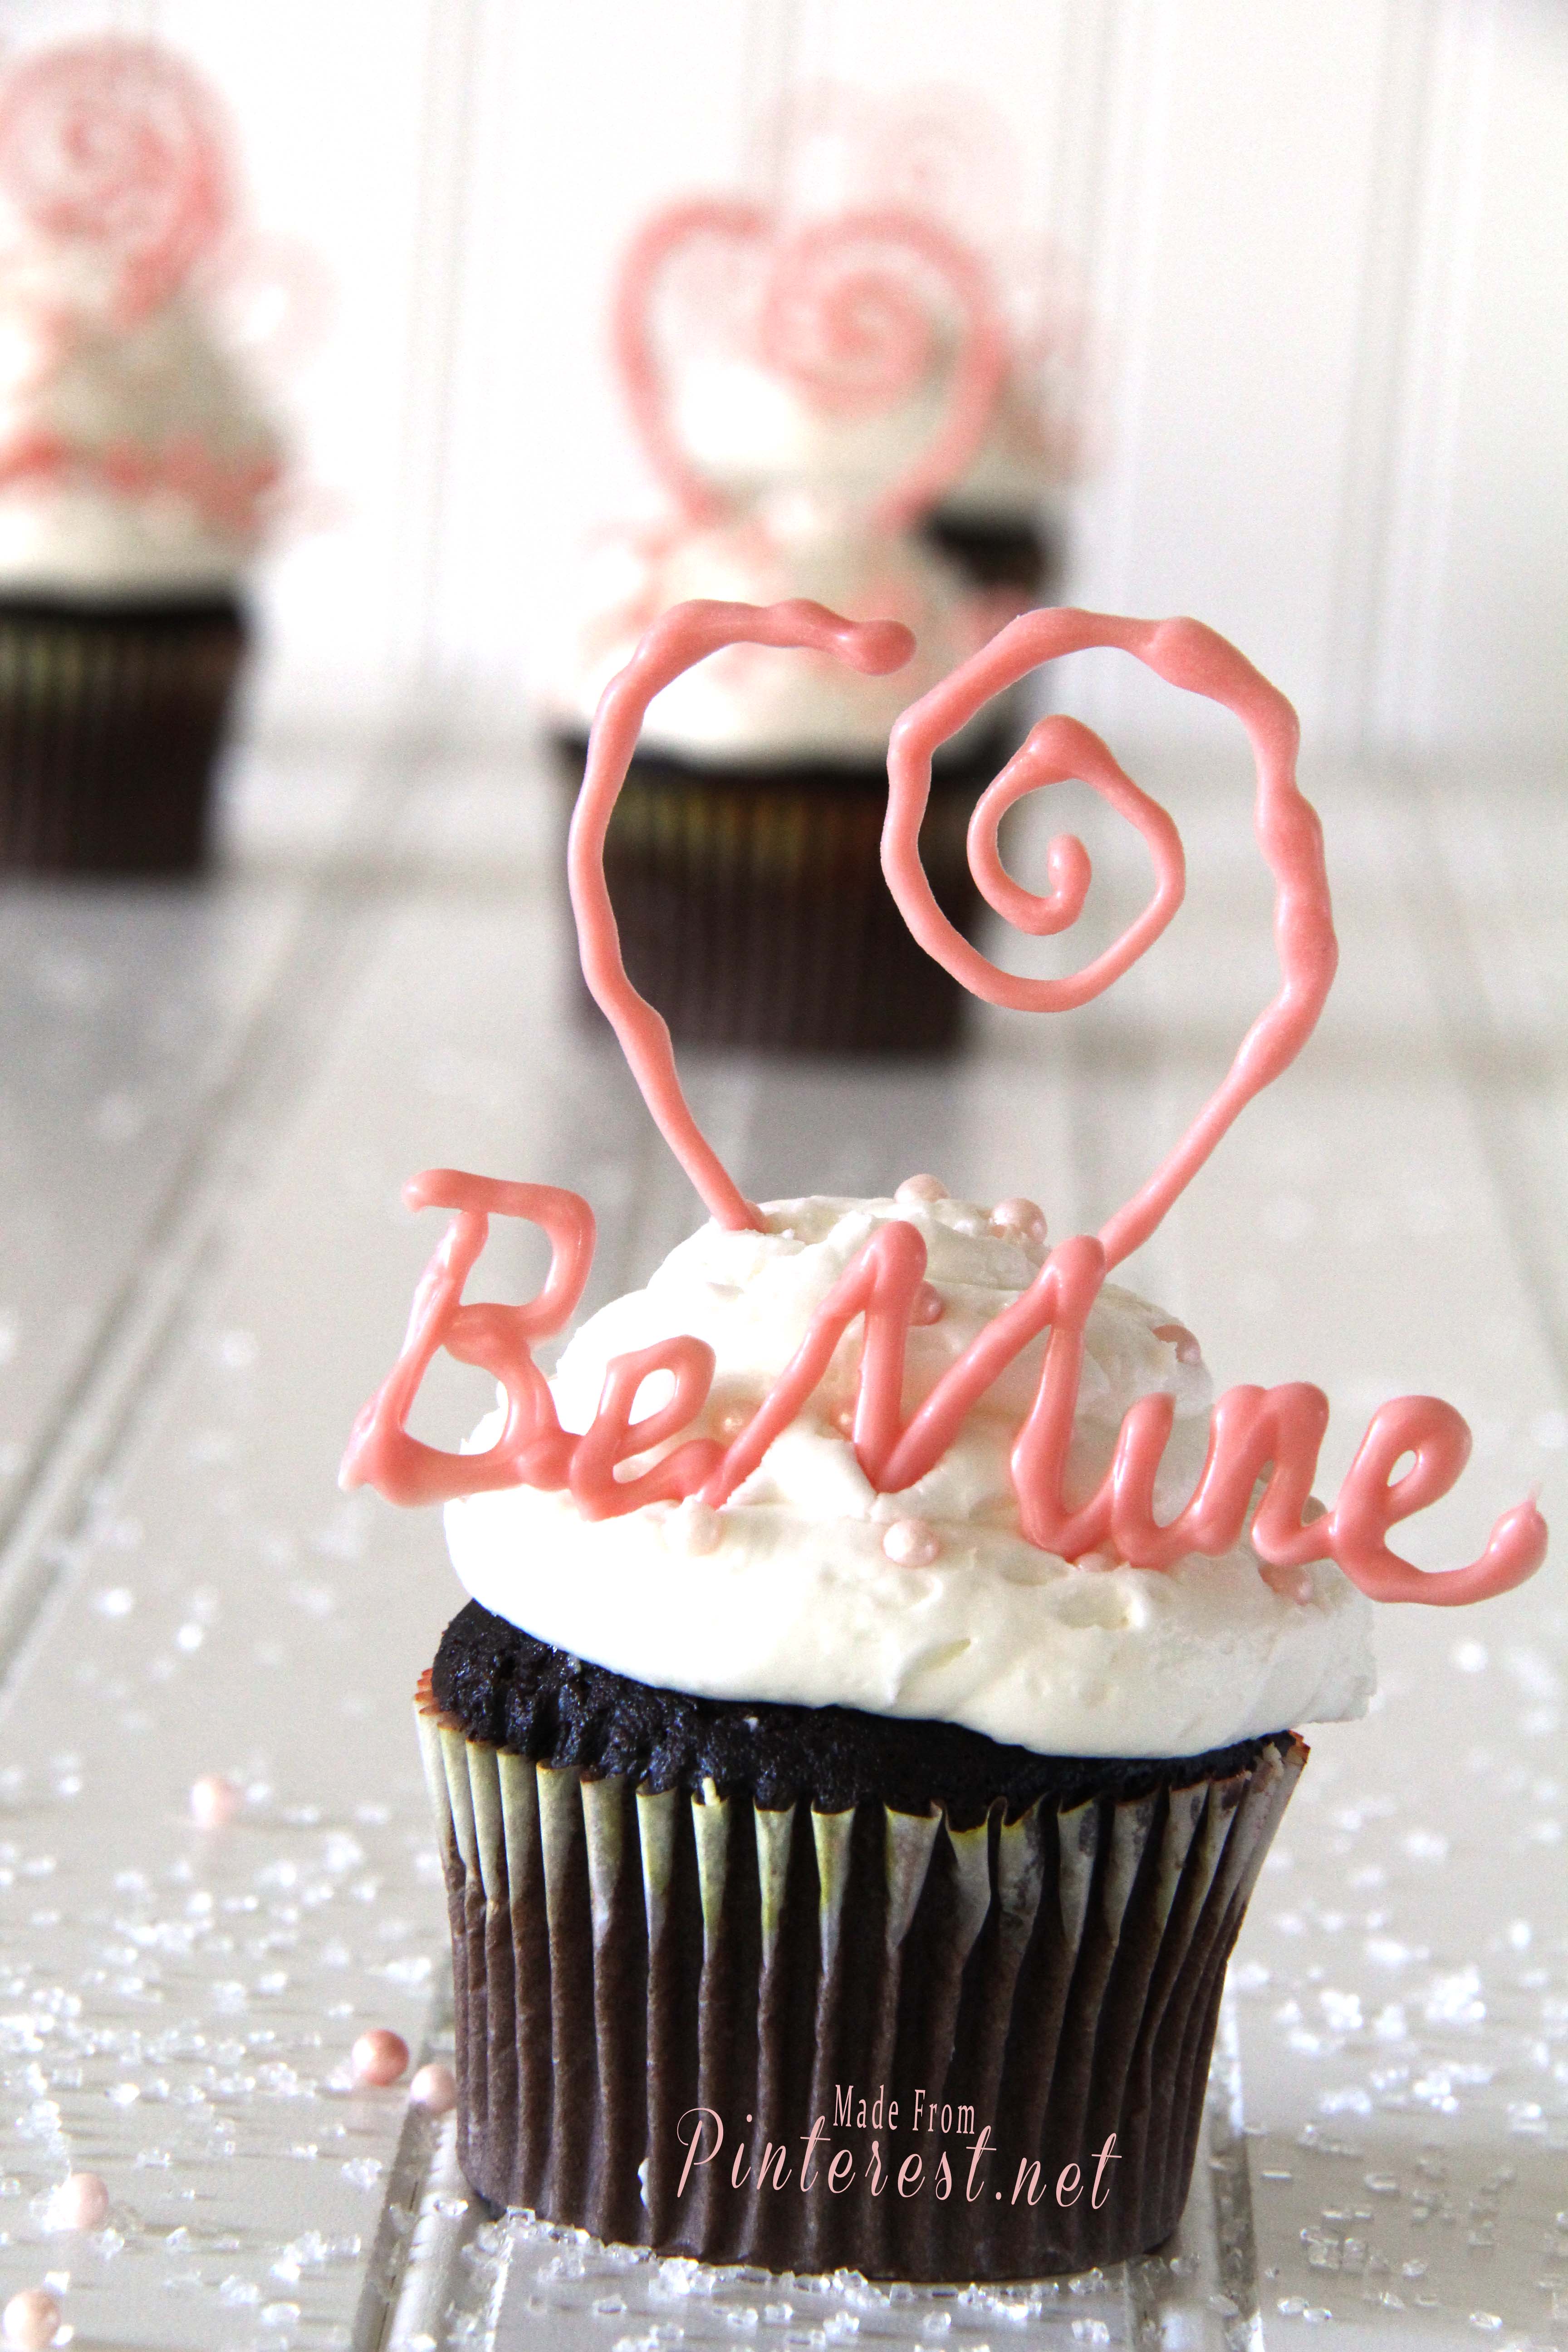 Valentines Day Idea - DIY Chocolate Cupcake Toppers! - Great way to turn a plain cupcake into a beautiful Valentines Day Treat. I cheated and used store bought cupcakes! #Valentines Day #Cupcake #Dessert